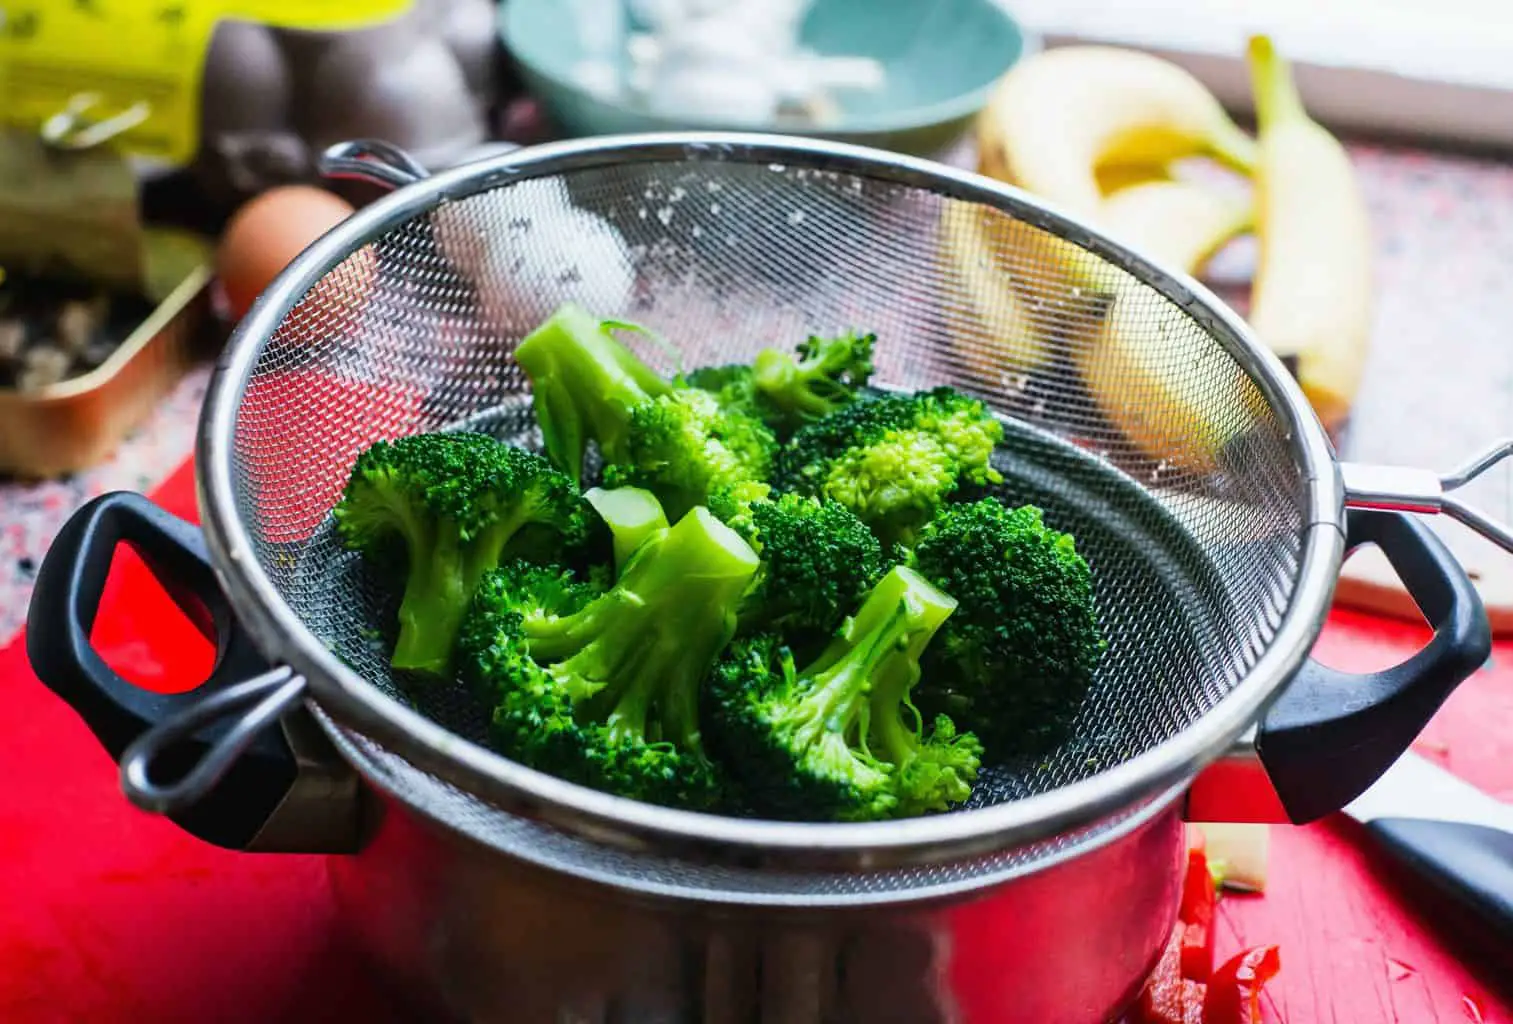 how to clean broccoli